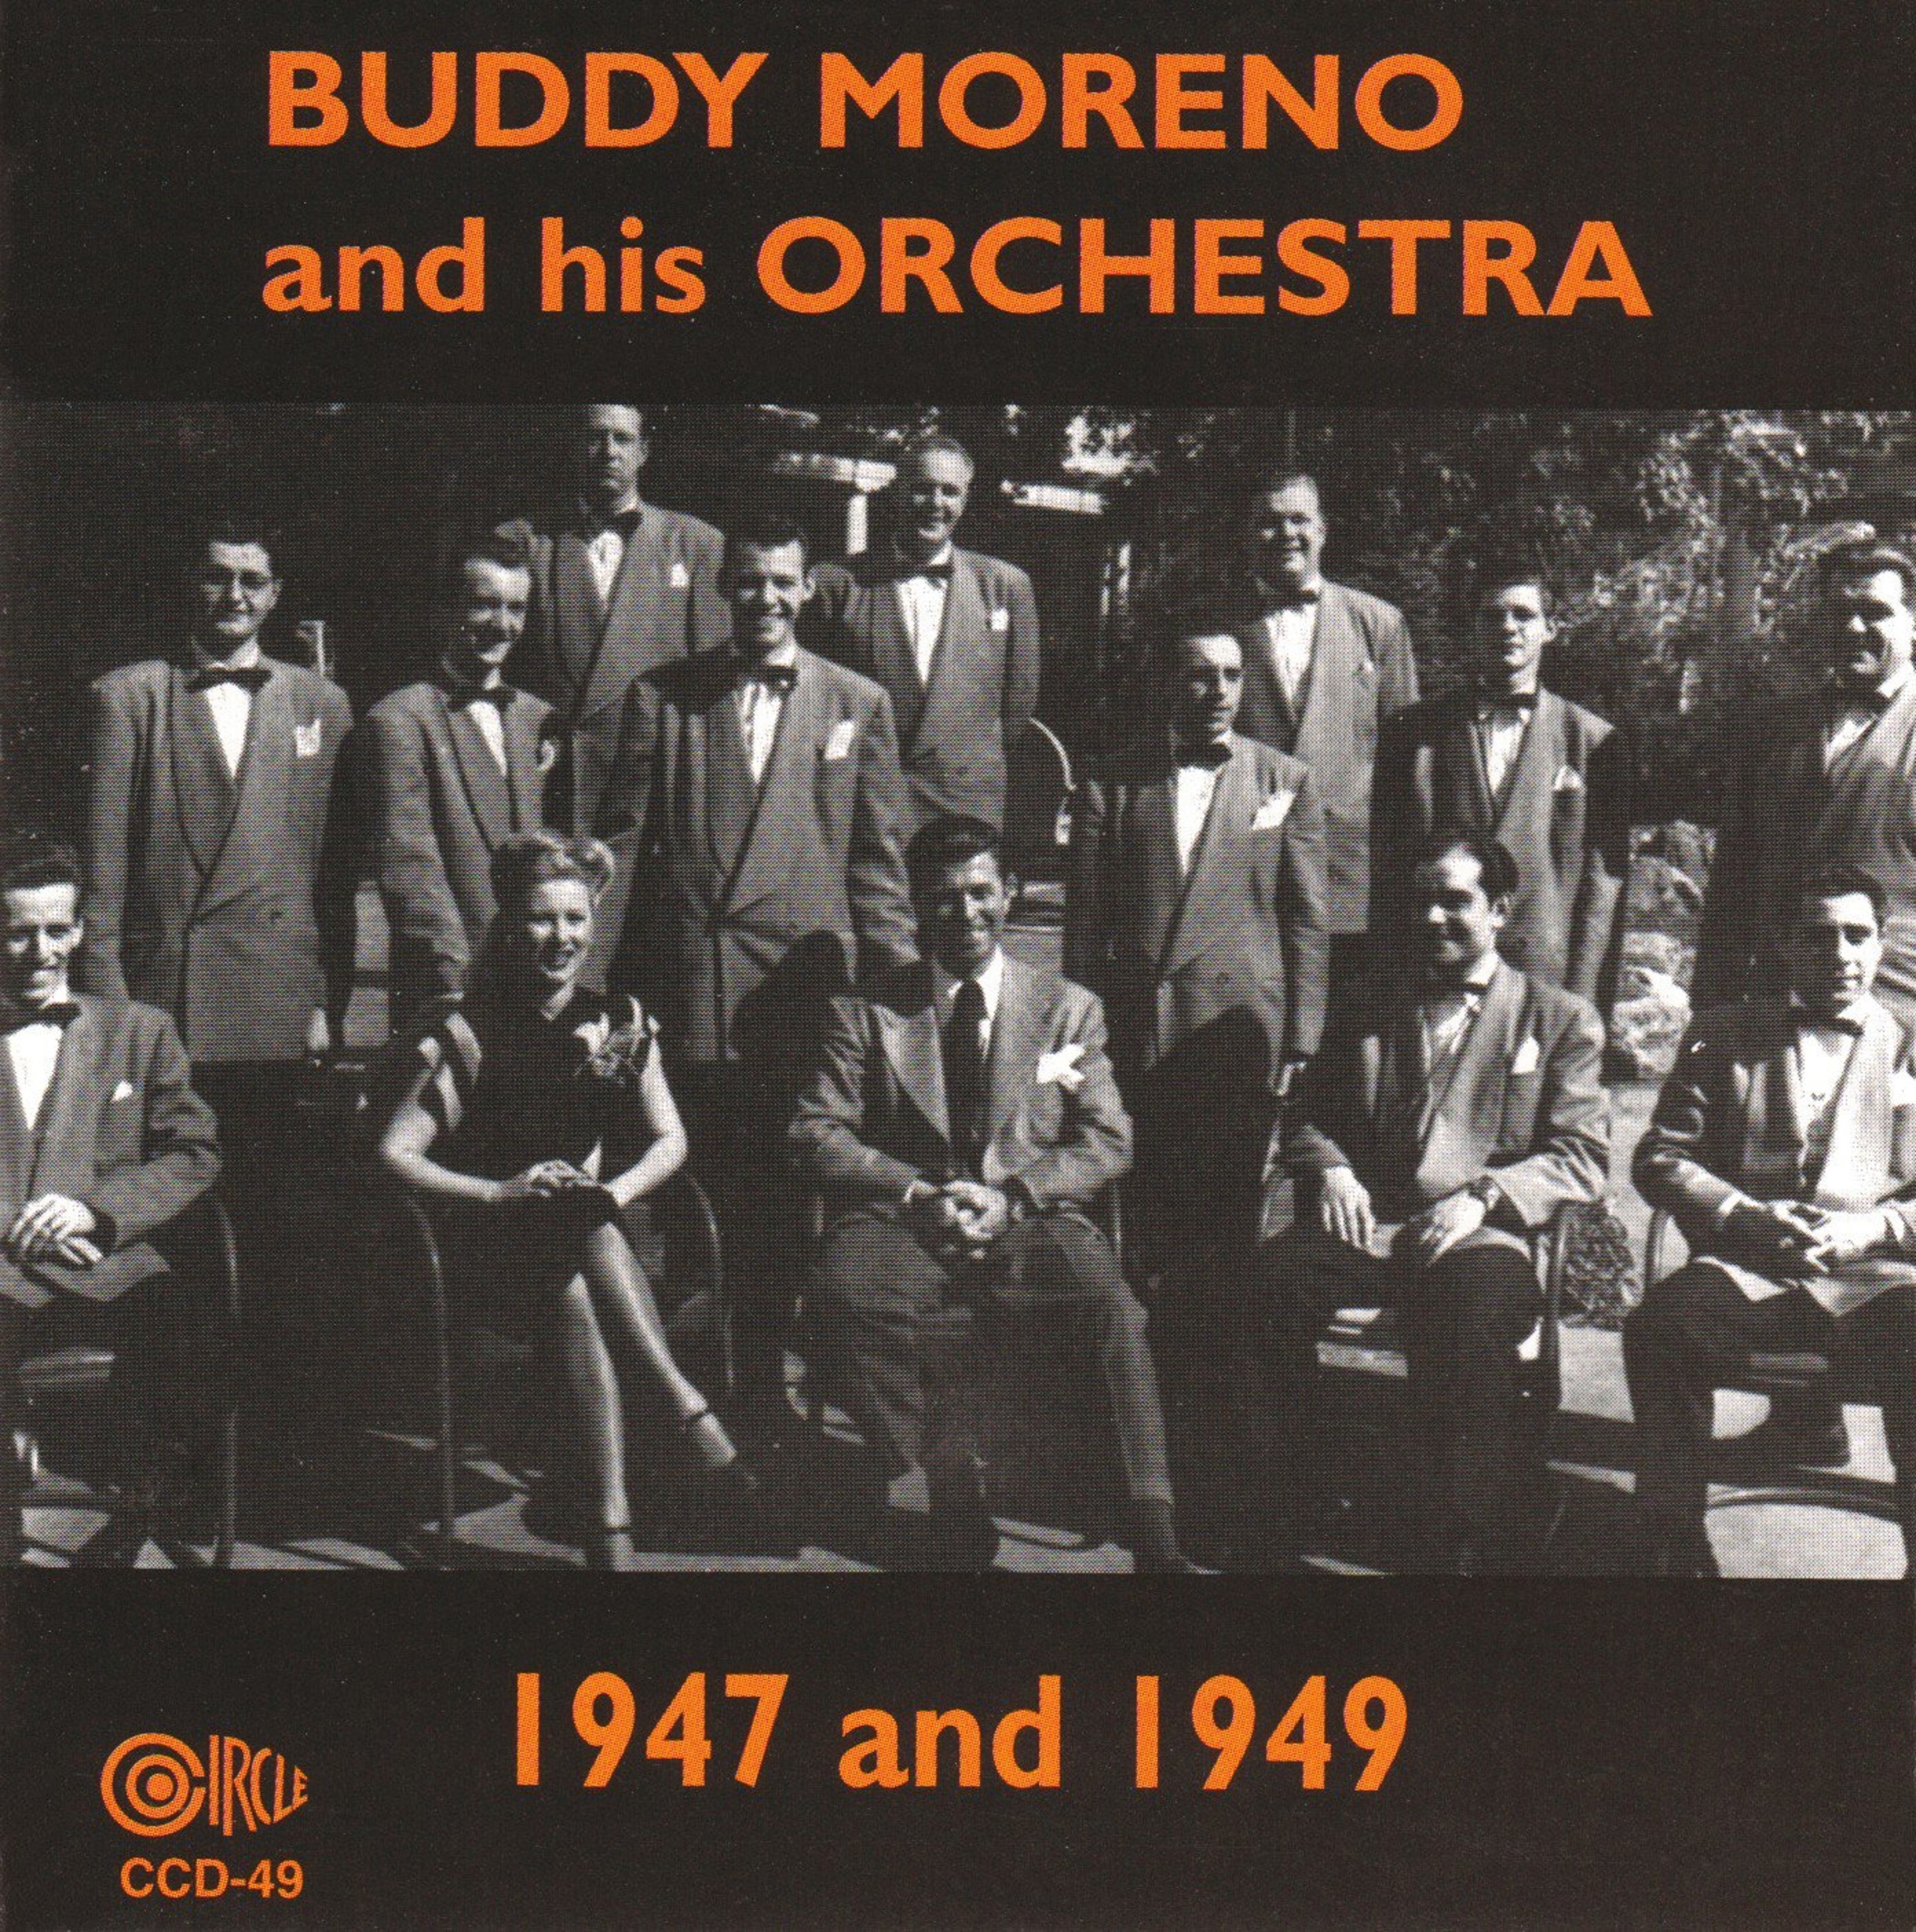 <p>In the days of swing, Moreno was a star. He was a guitarist, a singer, a bandleader, and more. In the ‘50s, he moved to St. Louis, where he had <em>The Buddy Moreno Show</em> and a national radio program.</p><p><a href='https://www.msn.com/en-us/community/channel/vid-cj9pqbr0vn9in2b6ddcd8sfgpfq6x6utp44fssrv6mc2gtybw0us'>Follow us on MSN to see more of our exclusive entertainment content.</a></p>